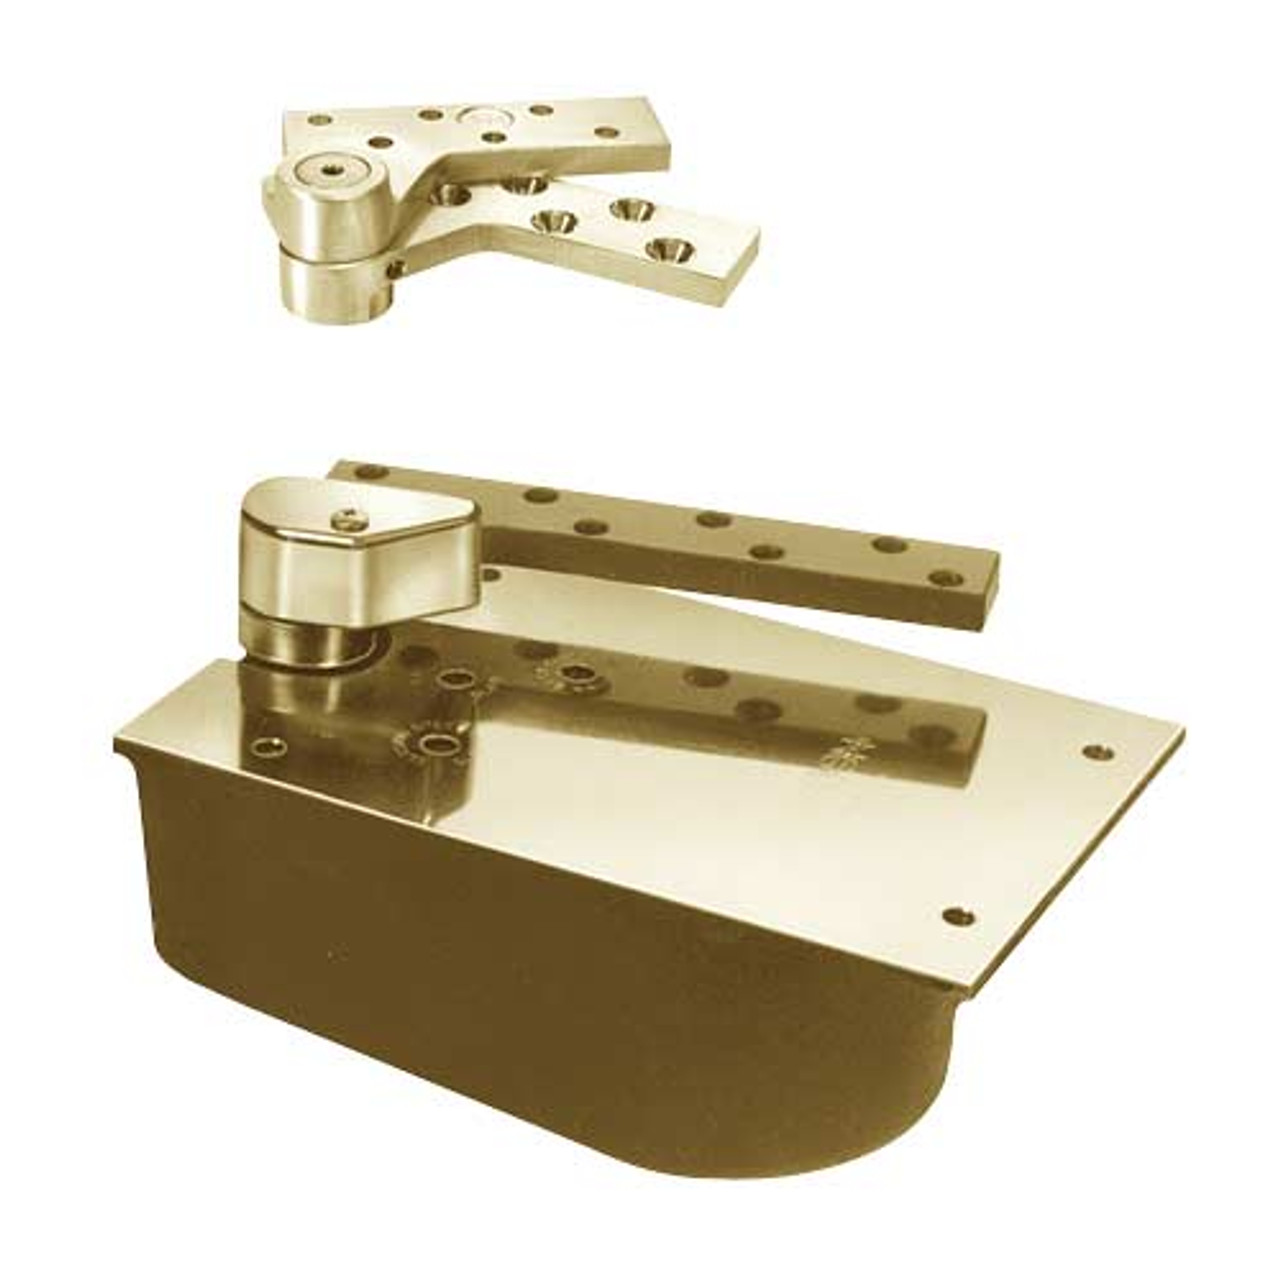 L27-90N-LFP-LH-606 Rixson 27 Series Extra Heavy Duty Lead Lined Offset Floor Closer in Satin Brass